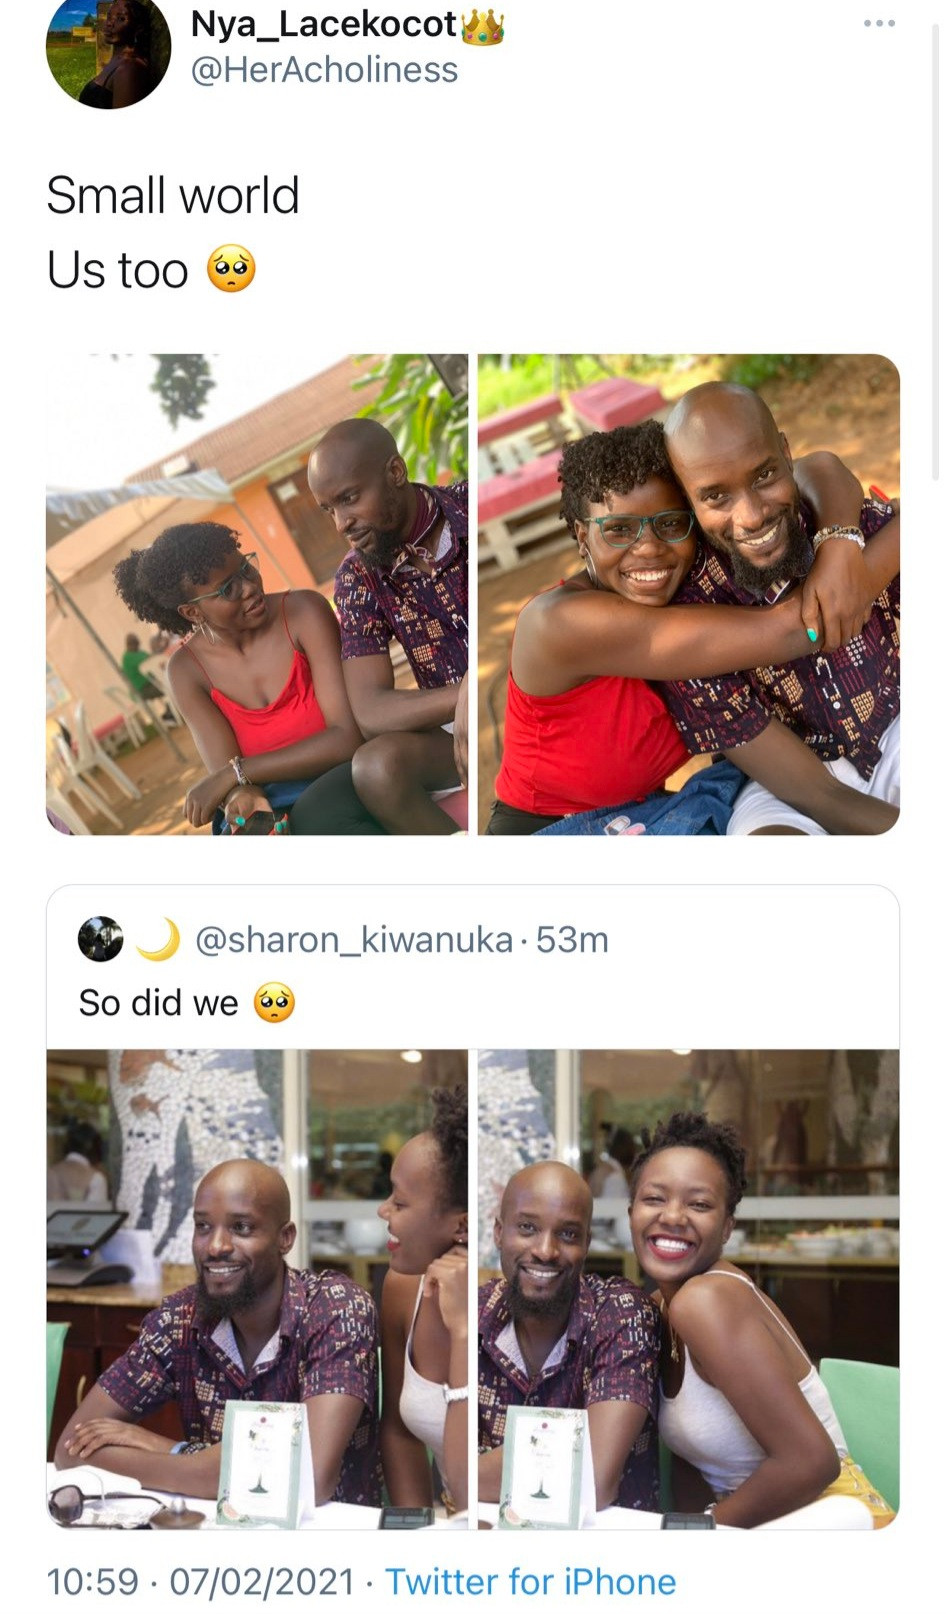 Three women find out on Twitter they are all dating the same man after one celebrated him